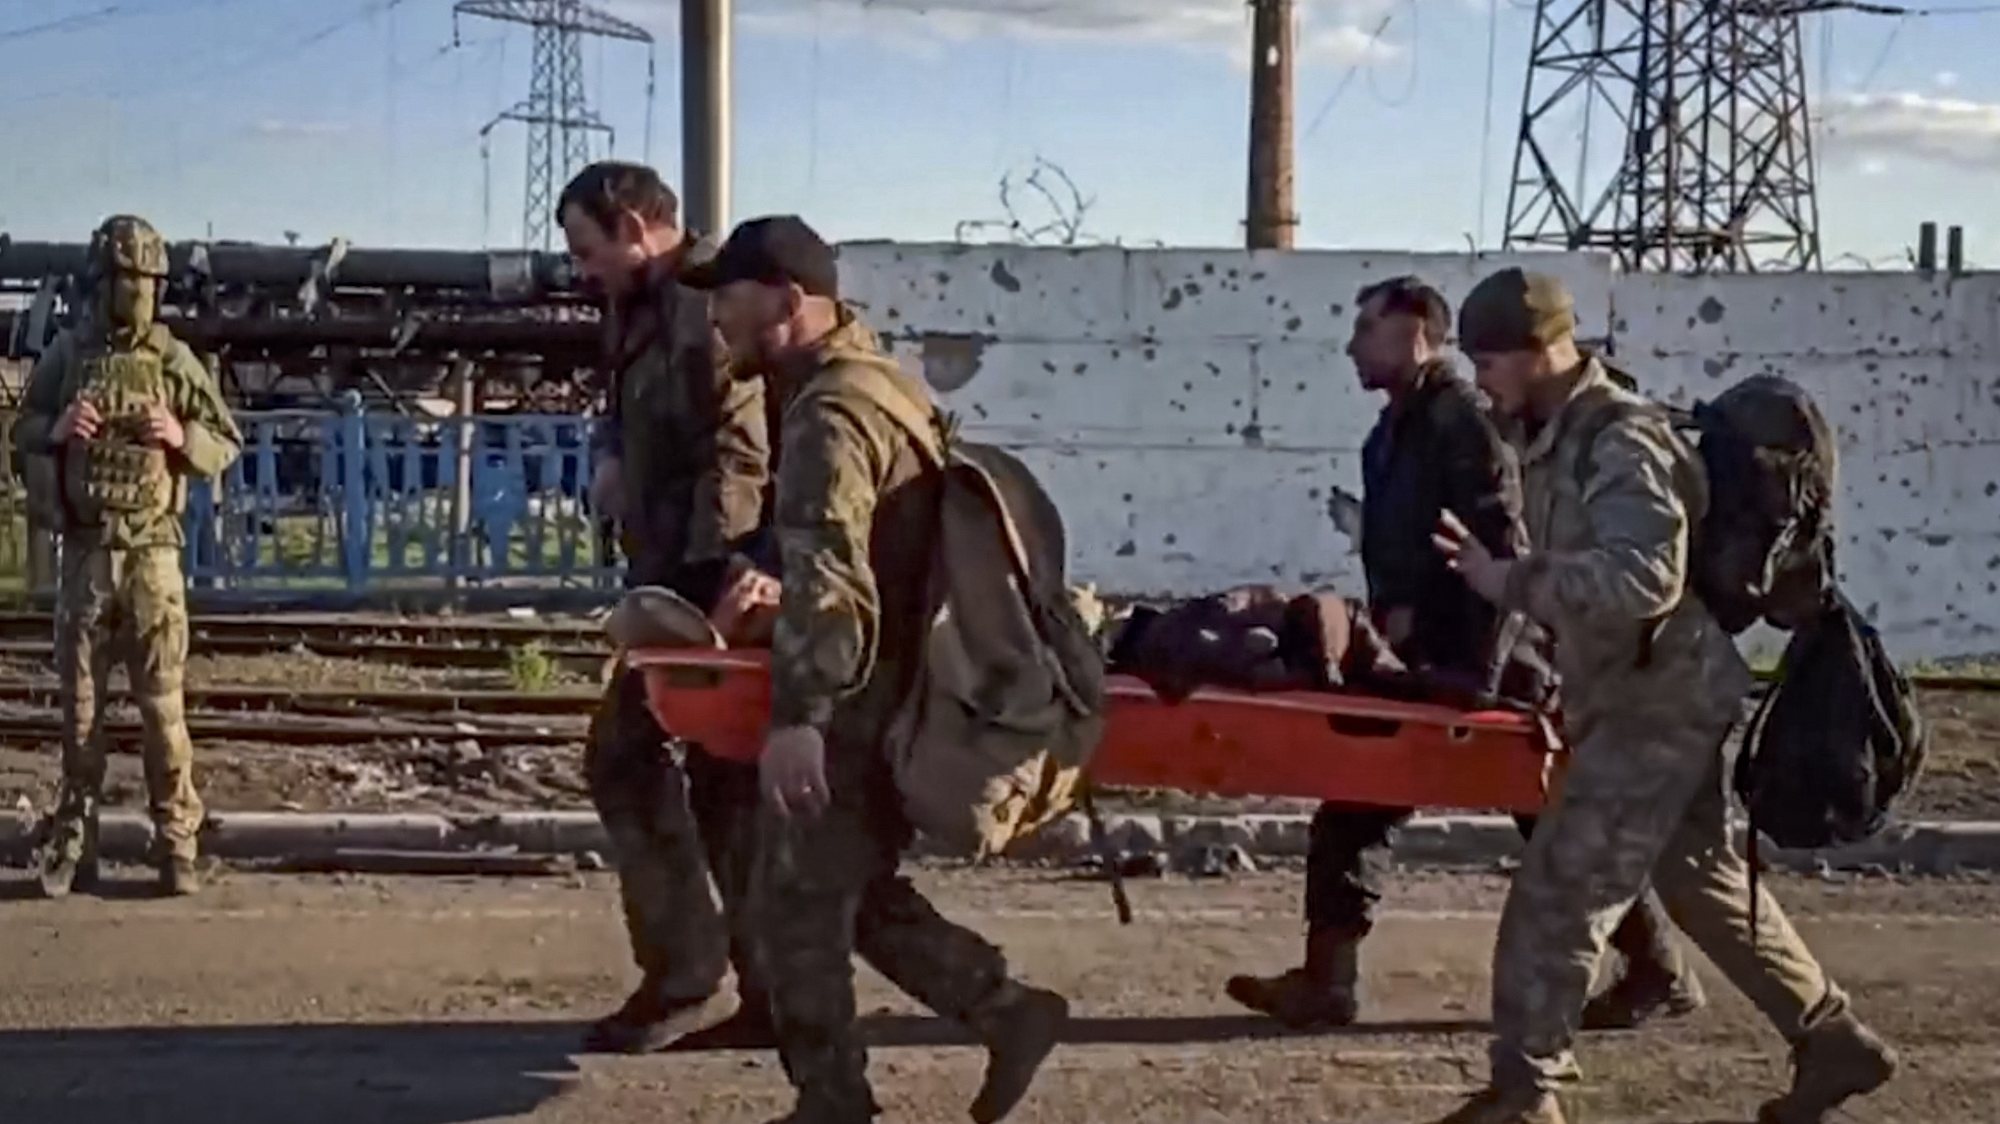 epa09952378 A handout still image taken from a handout video made available by the Russian Defence Ministry&#039;s press service shows Ukrainian servicemen carry a wounded comrade as they are being evacuated from the besieged Azovstal steel plant in Mariupol, Ukraine, 17 May 2022. A total of 265 Ukrainian militants, including 51 seriously wounded, have laid down arms and surrendered to Russian forces, the Russian Ministry of Defence said on 17 May 2022. Those in need of medical assistance were sent for treatment to a hospital in Novoazovsk, the ministry states further. Russian President Putin on 21 April 2022 ordered his Defence Minister to not storm but to blockade the plant where a number of Ukrainian fighters were holding out. On 24 February, Russian troops invaded Ukrainian territory starting a conflict that has provoked destruction and a humanitarian crisis. According to the UNHCR, more than six million refugees have fled Ukraine, and a further 7.7 million people have been displaced internally within Ukraine since.  EPA/RUSSIAN DEFENCE MINISTRY PRESS SERVICE HANDOUT  BEST QUALITY AVAILABLE HANDOUT EDITORIAL USE ONLY/NO SALES